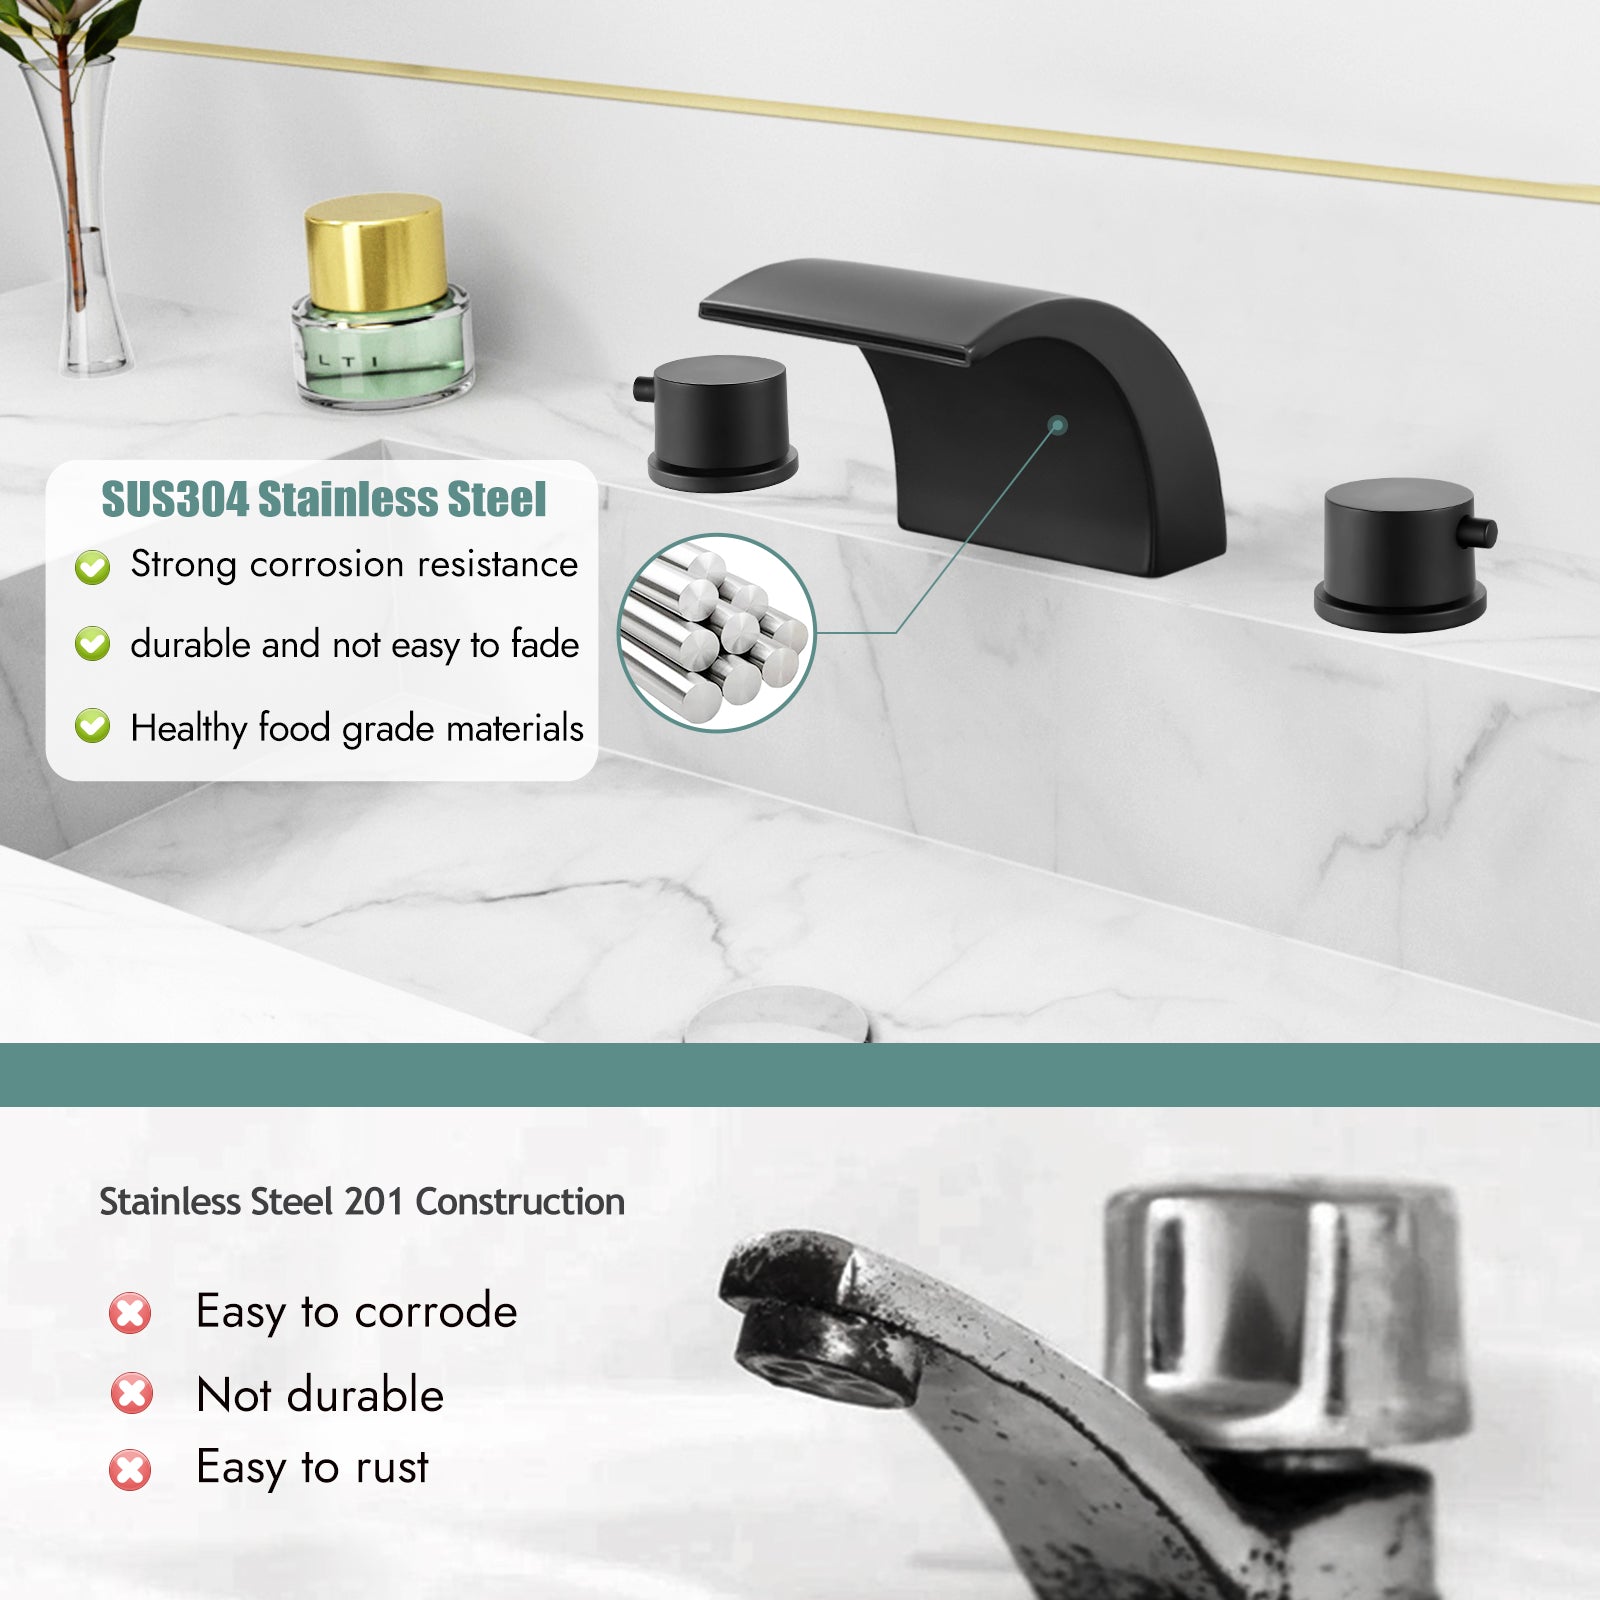 Heyalan Bathroom Widespread Sink Faucet Waterfall Spout 8 16 Inch Dual Handles Three Holes Deck Mount Pop Up Drain with Overflow Bathtub Basin Mixer Tap Commercial